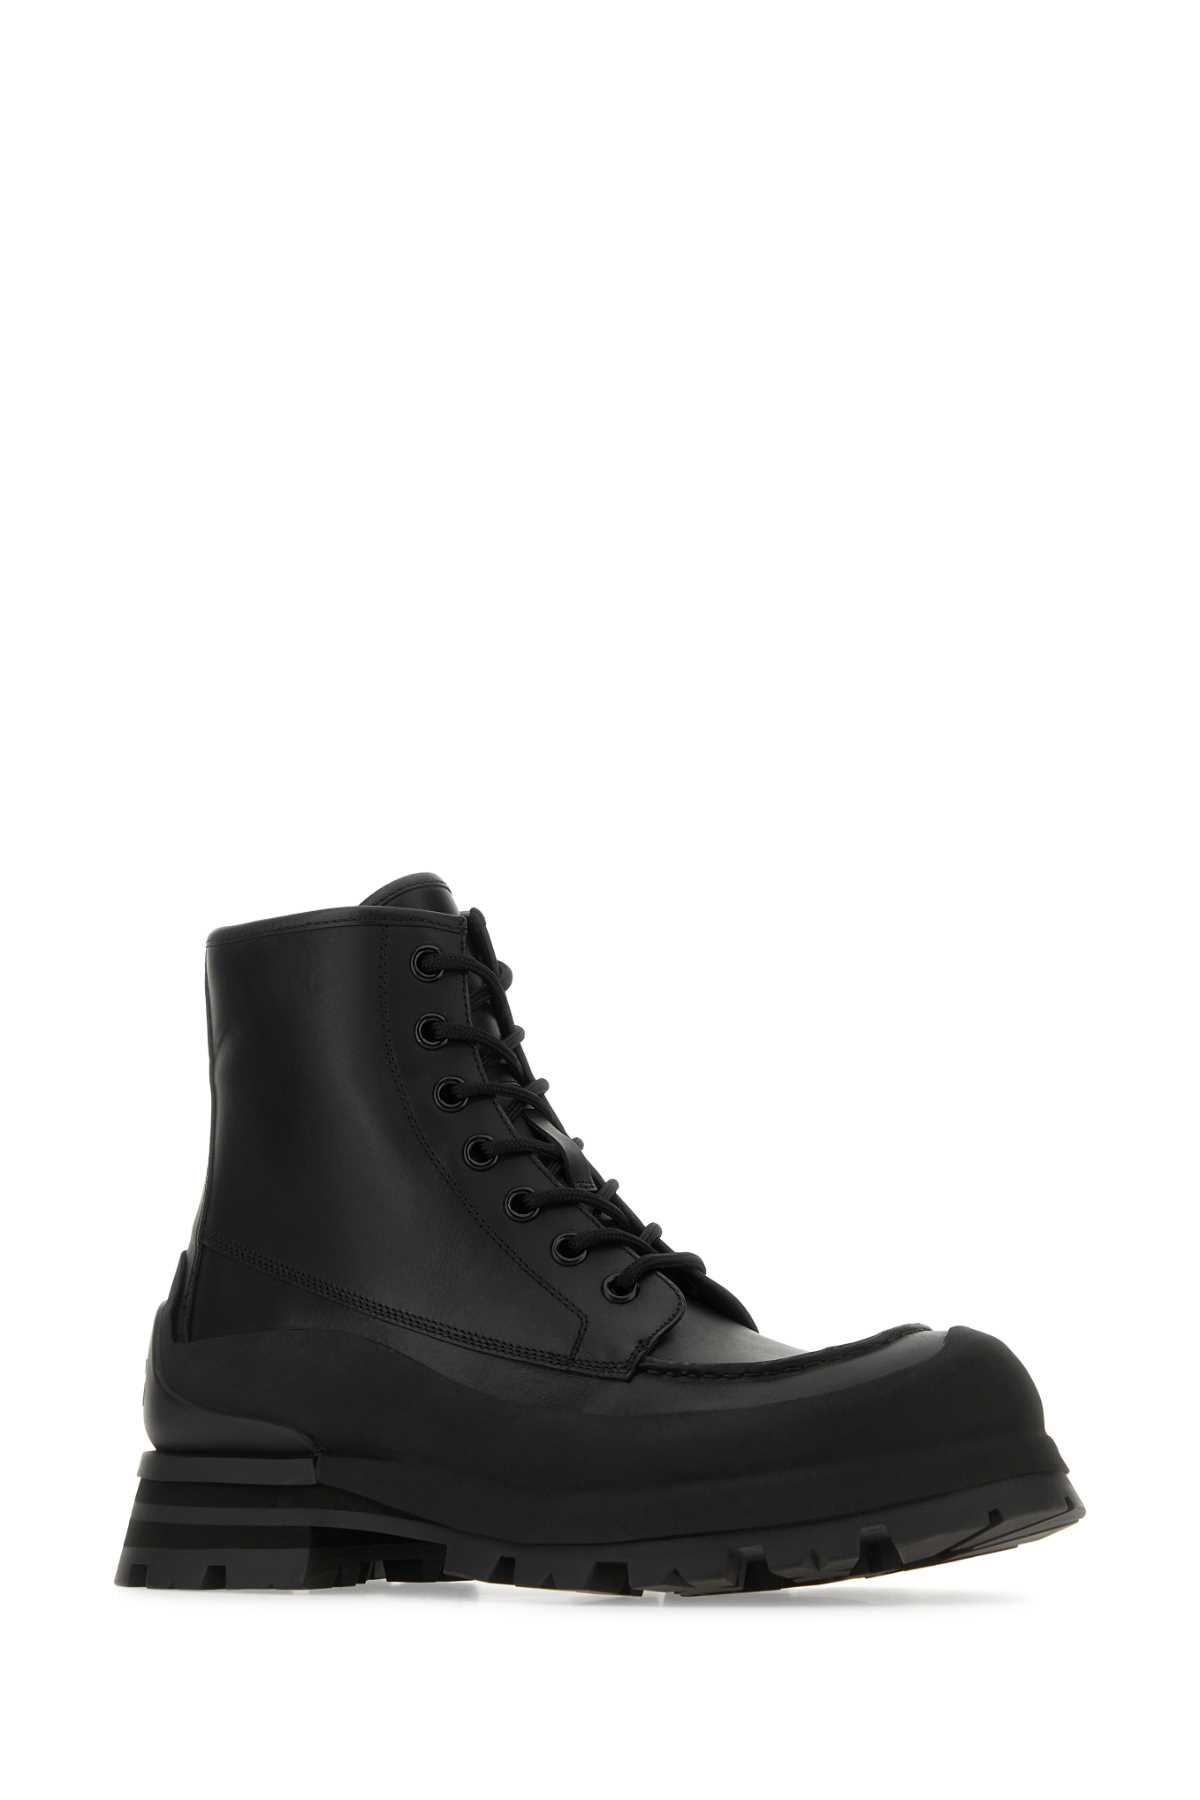 ALEXANDER MCQUEEN BLACK LEATHER WANDER ANKLE BOOTS